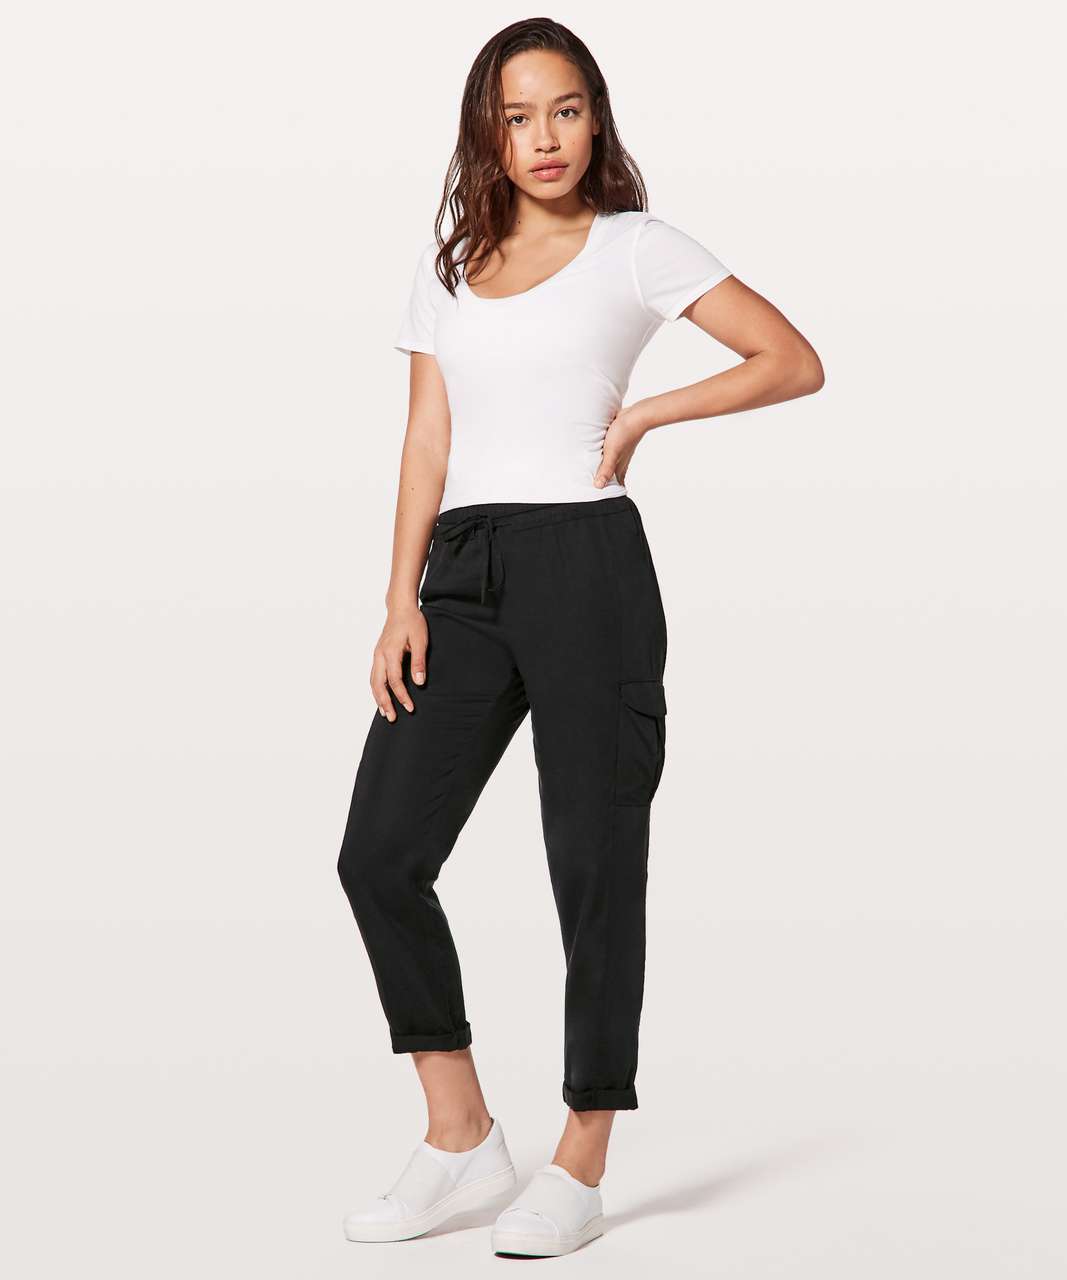 Lululemon Move Lightly Pants Sporty Performance Ankle Crop Cargo Pant Gray  Sz 6 - $37 - From Scarlet